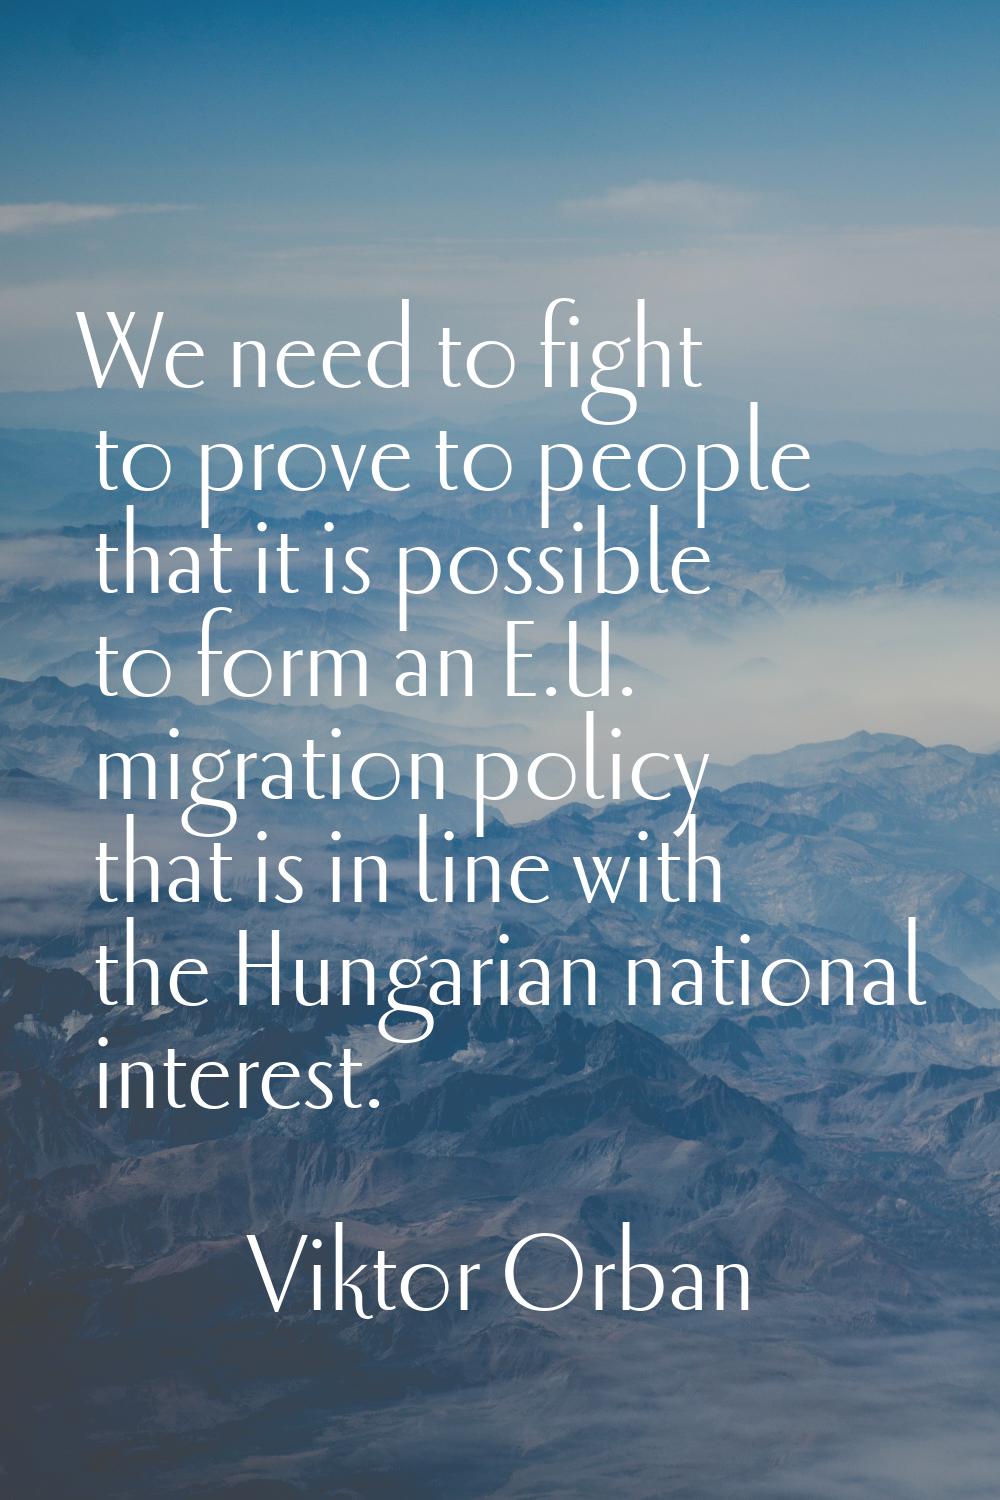 We need to fight to prove to people that it is possible to form an E.U. migration policy that is in